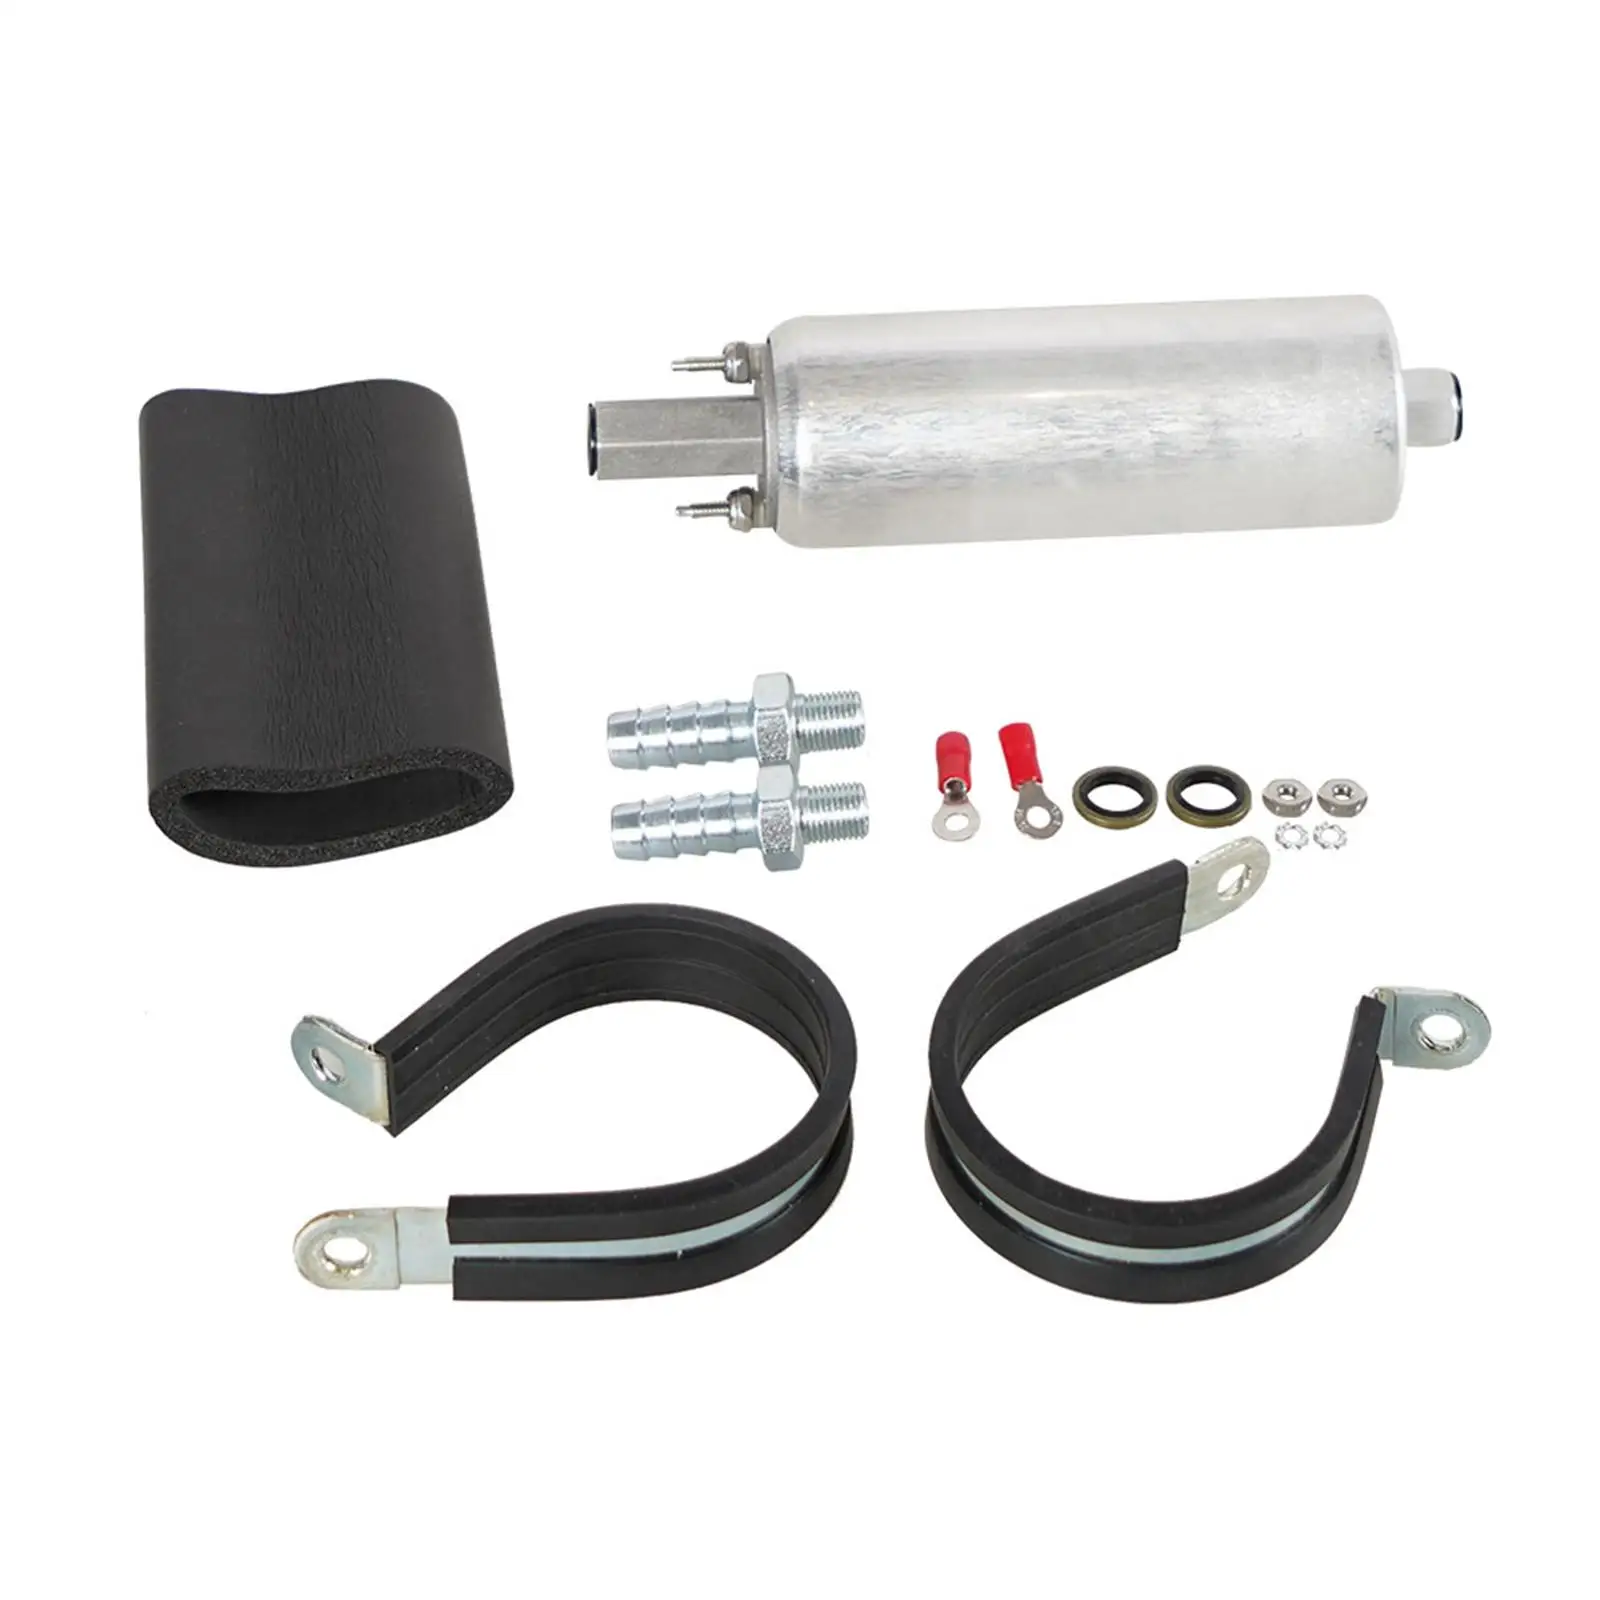 Inline Fuel Pump 255Lph with Installation Kit Gsl392-400-939 Direct Replaces